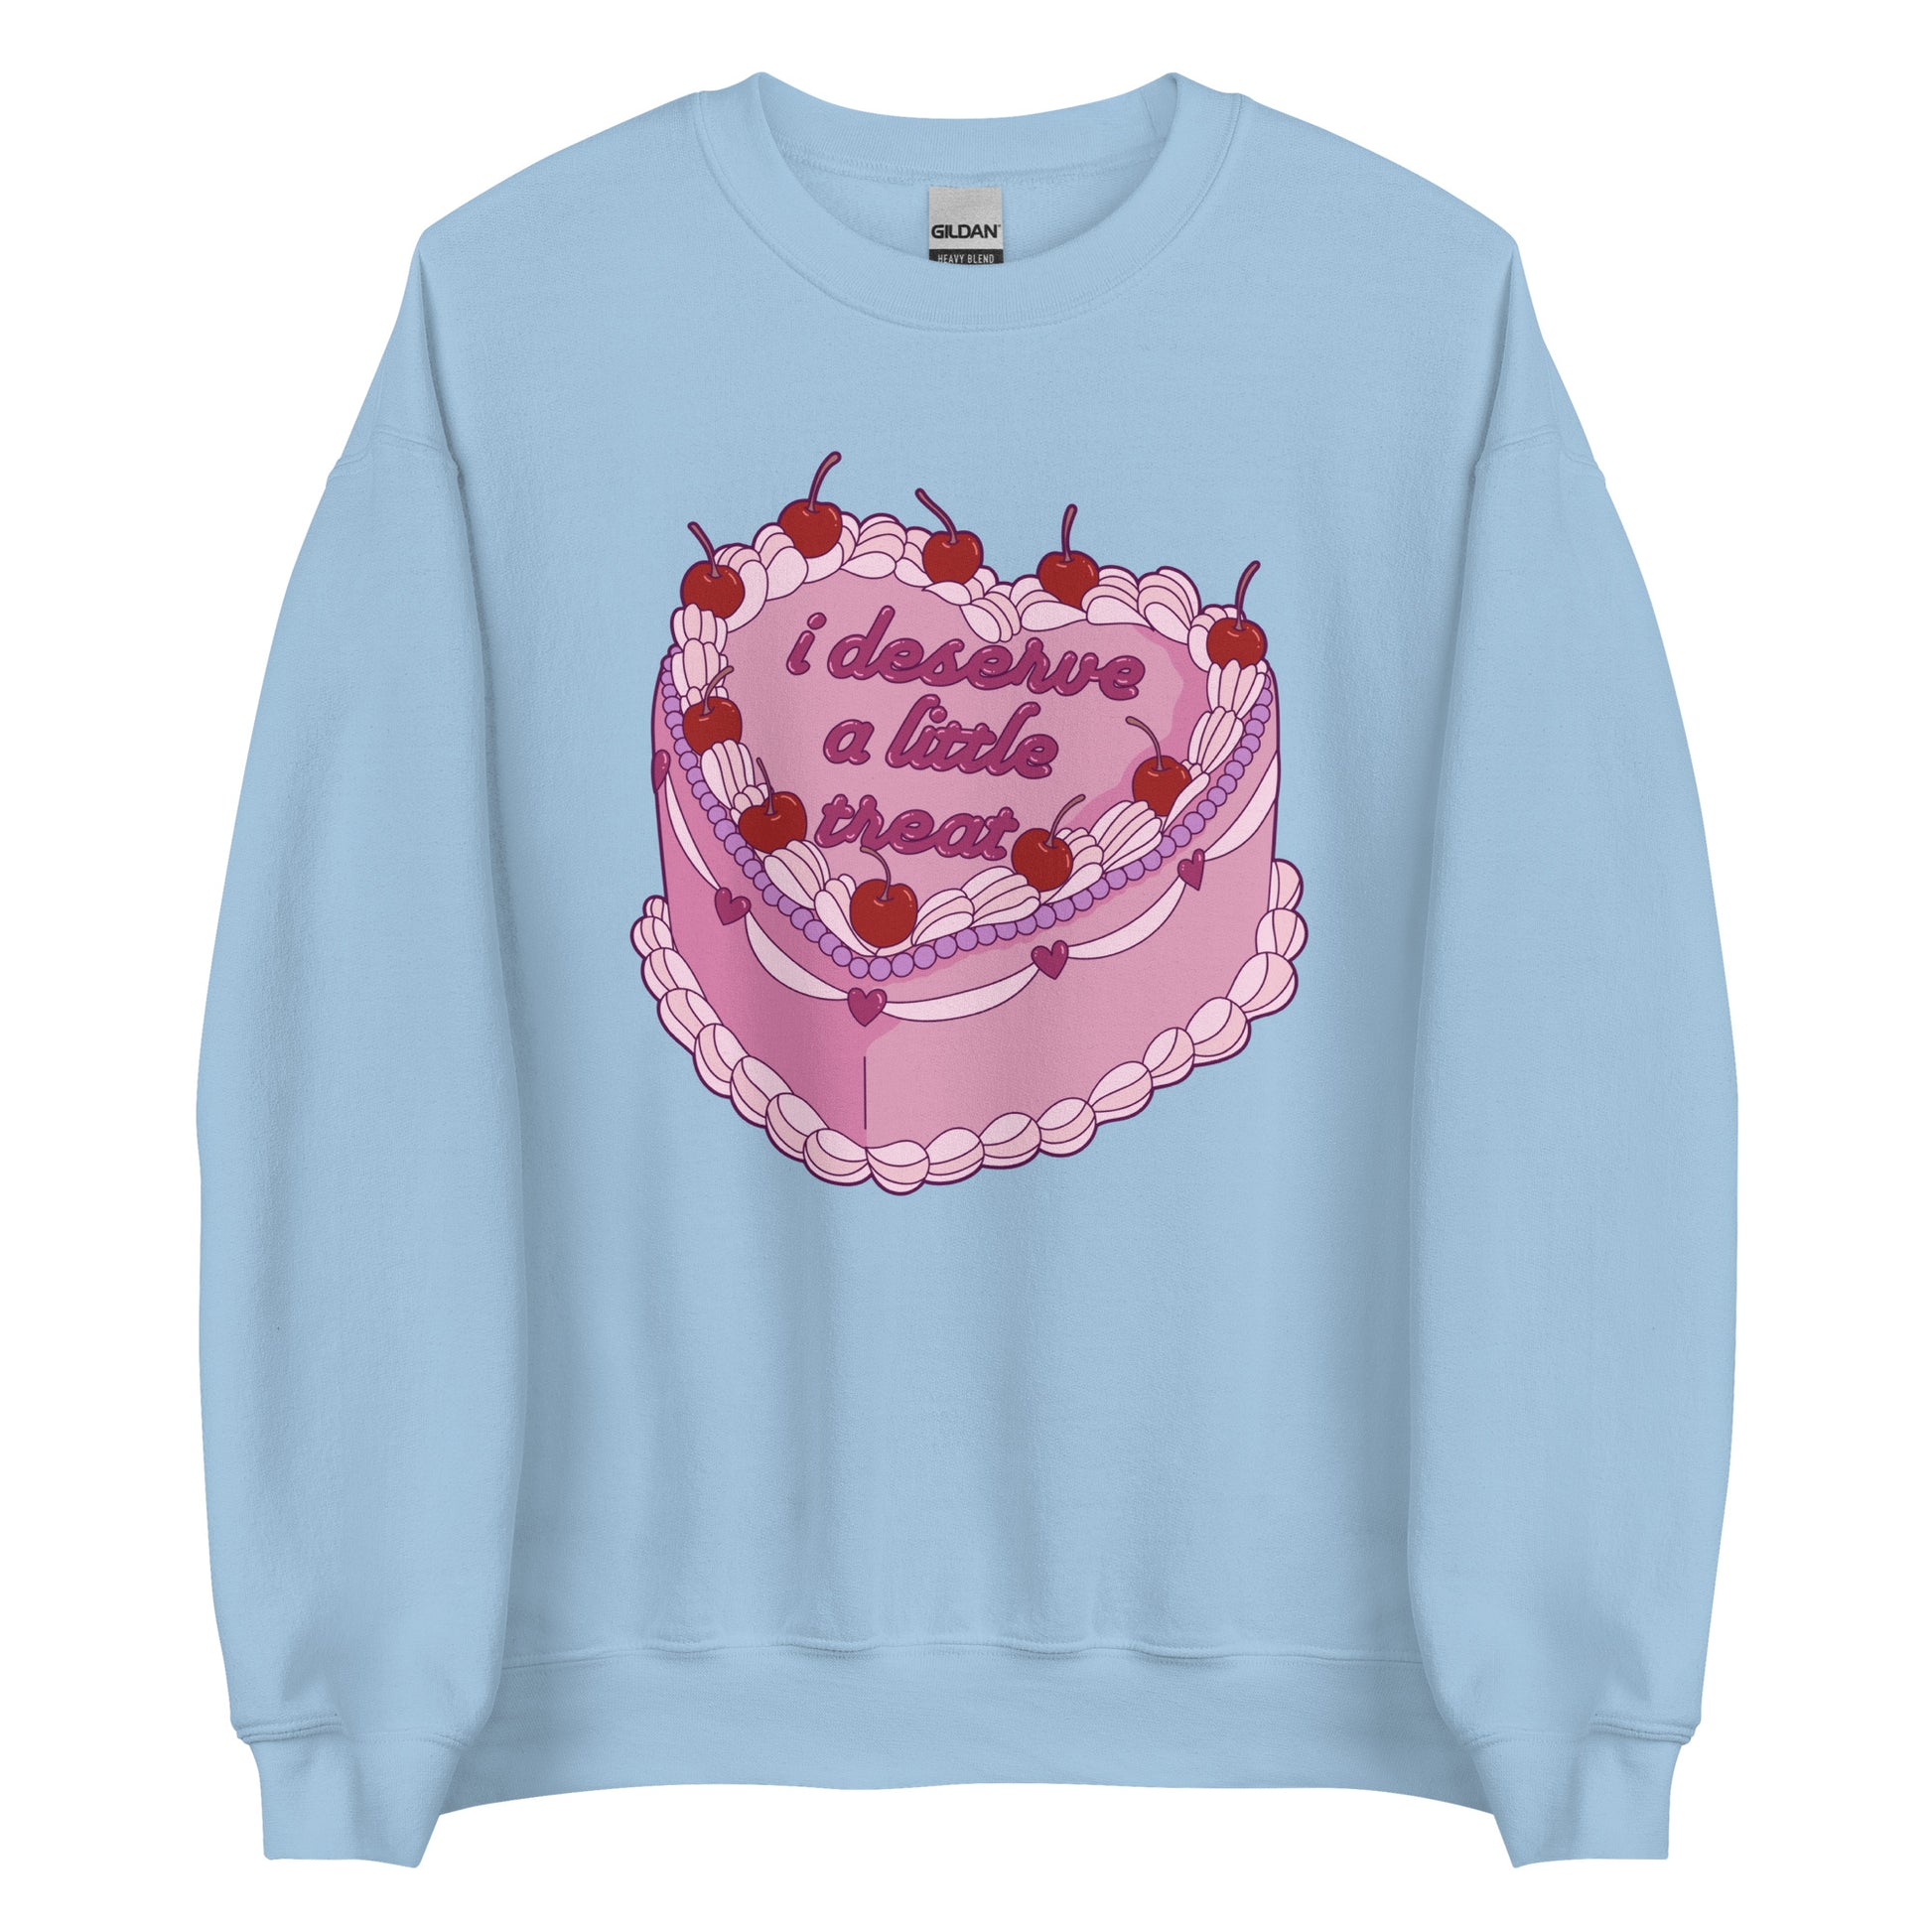 A light blue crewneck sweatshirt featuring an illustration of an elaborately decorated pink cake. Icing on the cake reads "i deserve a little treat" in a cursive font.